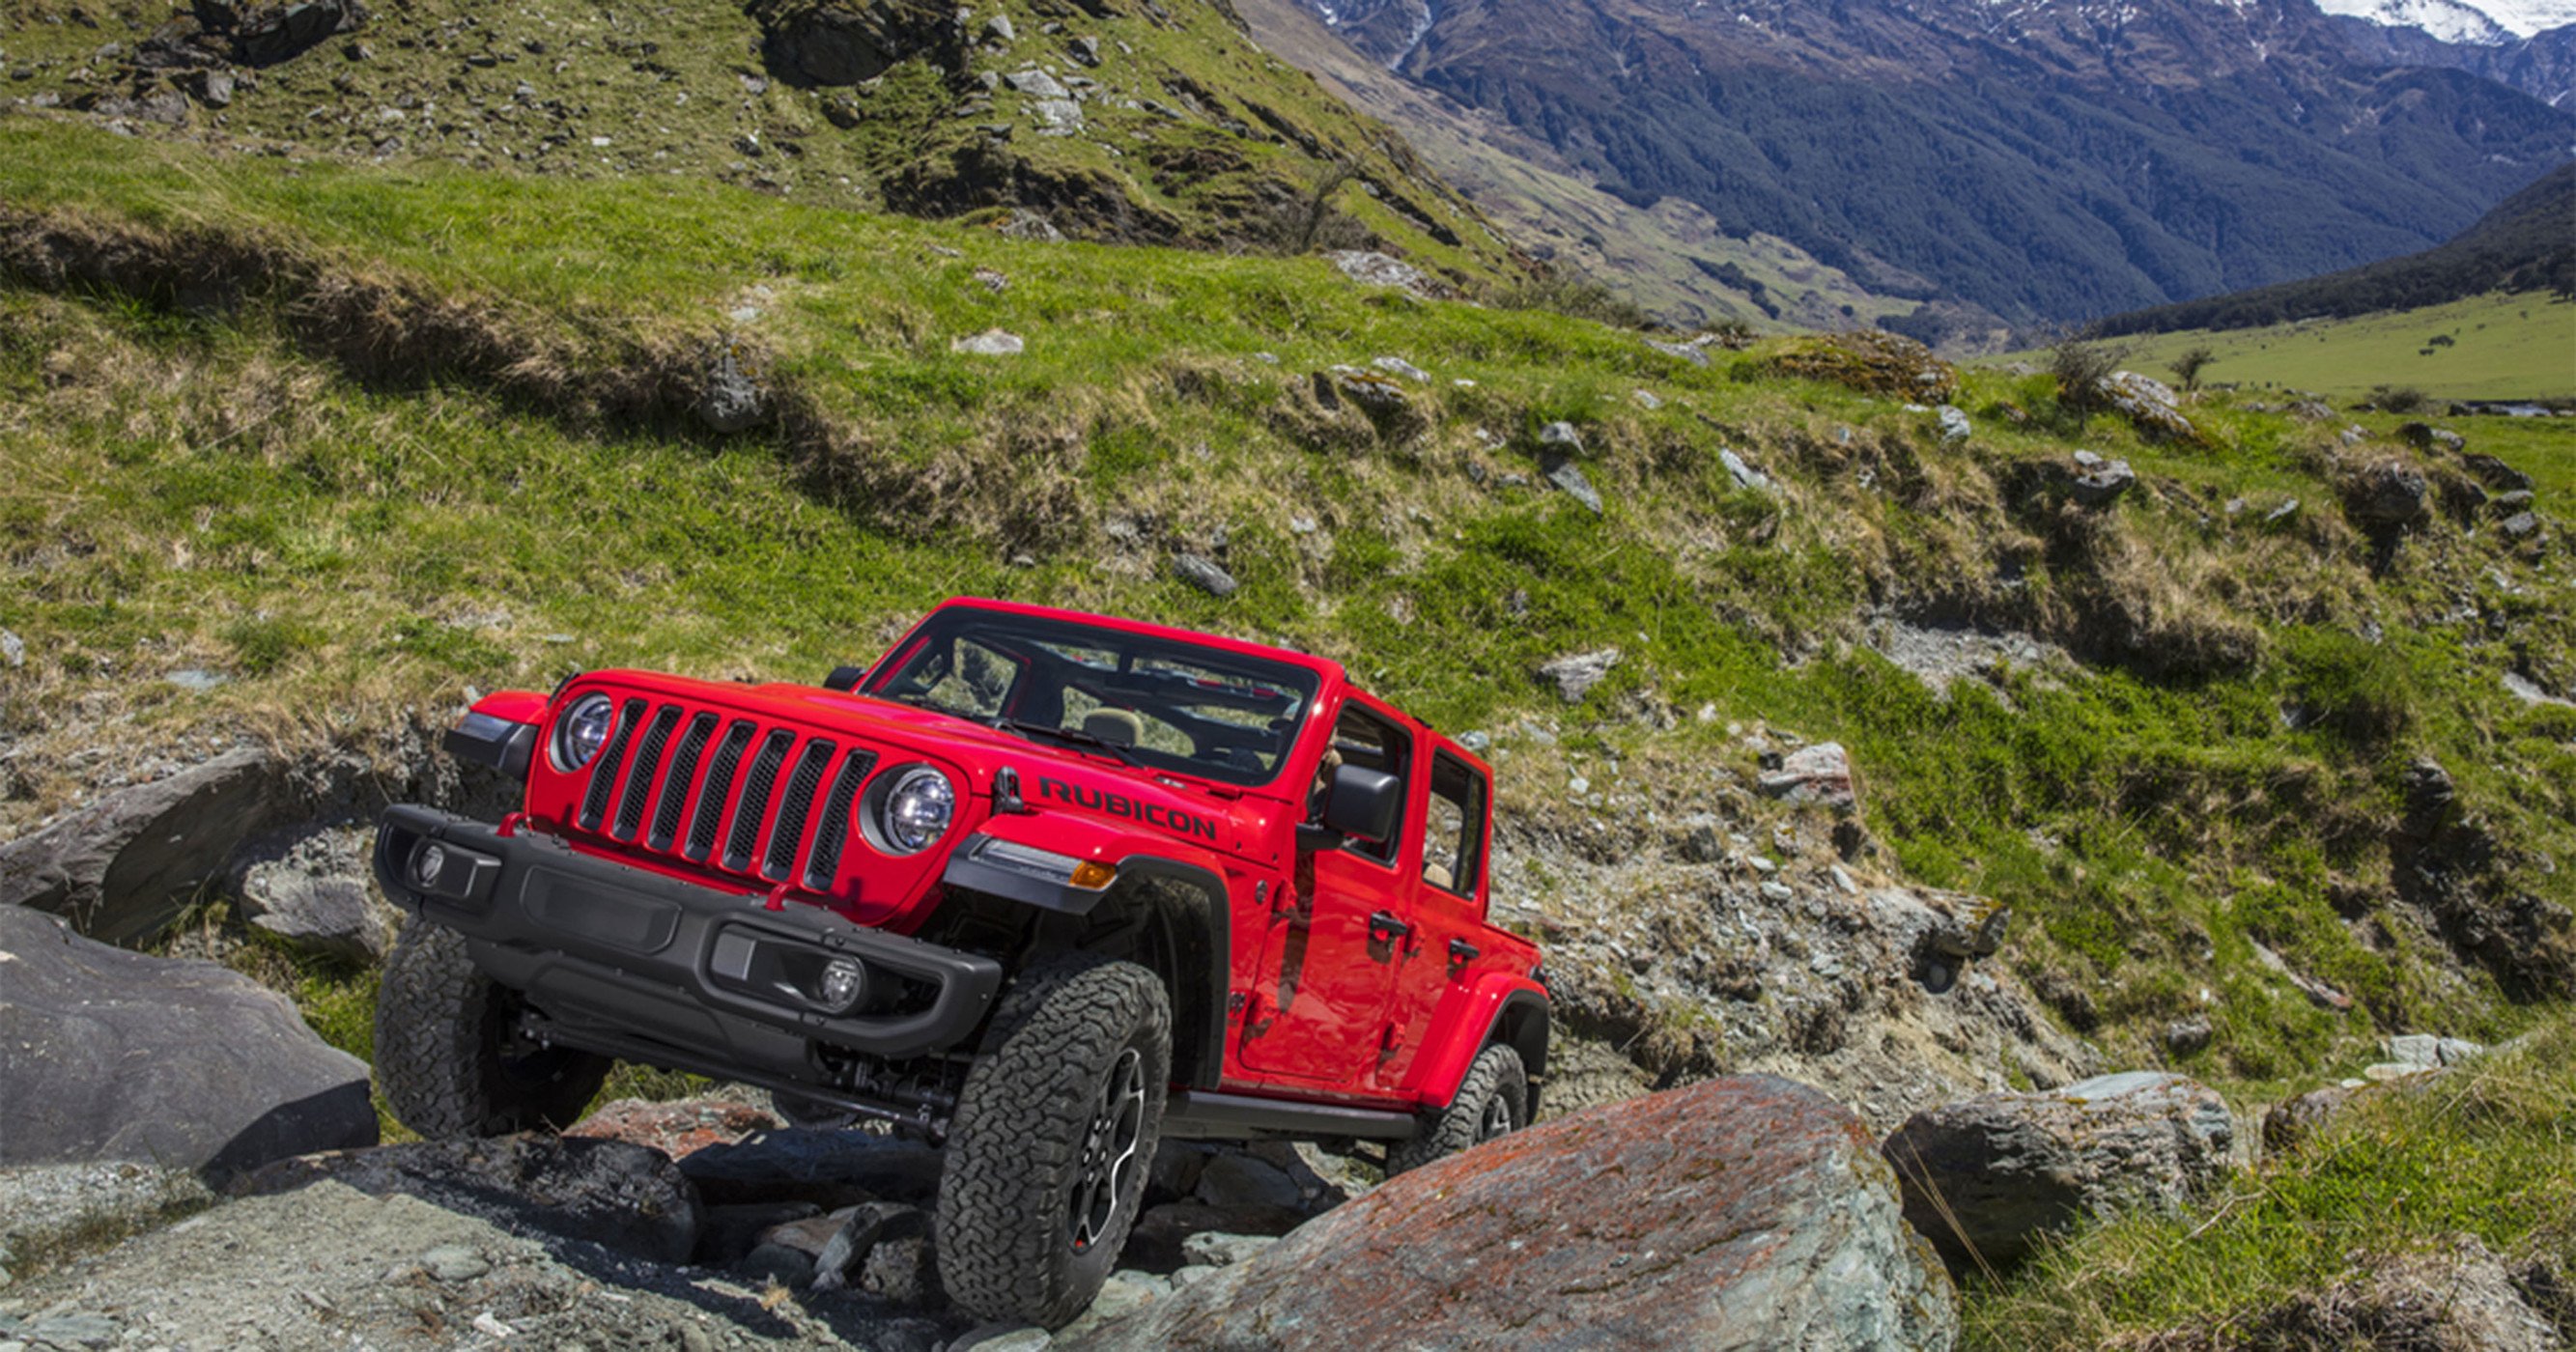 Front view of Jeep Wrangler with mountains in distance.